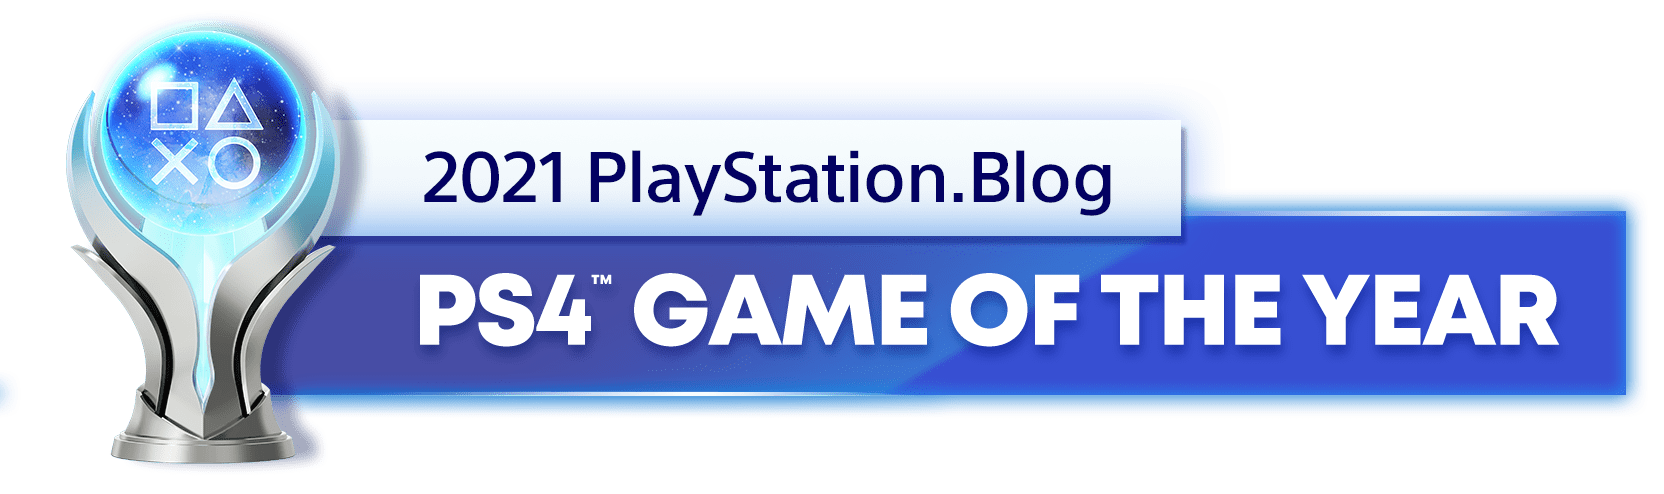 0d0c942d11ef16f8fa86ed92e34768b0fea645df - PS.Blog: Gewinner der Game of the Year Awards 2021